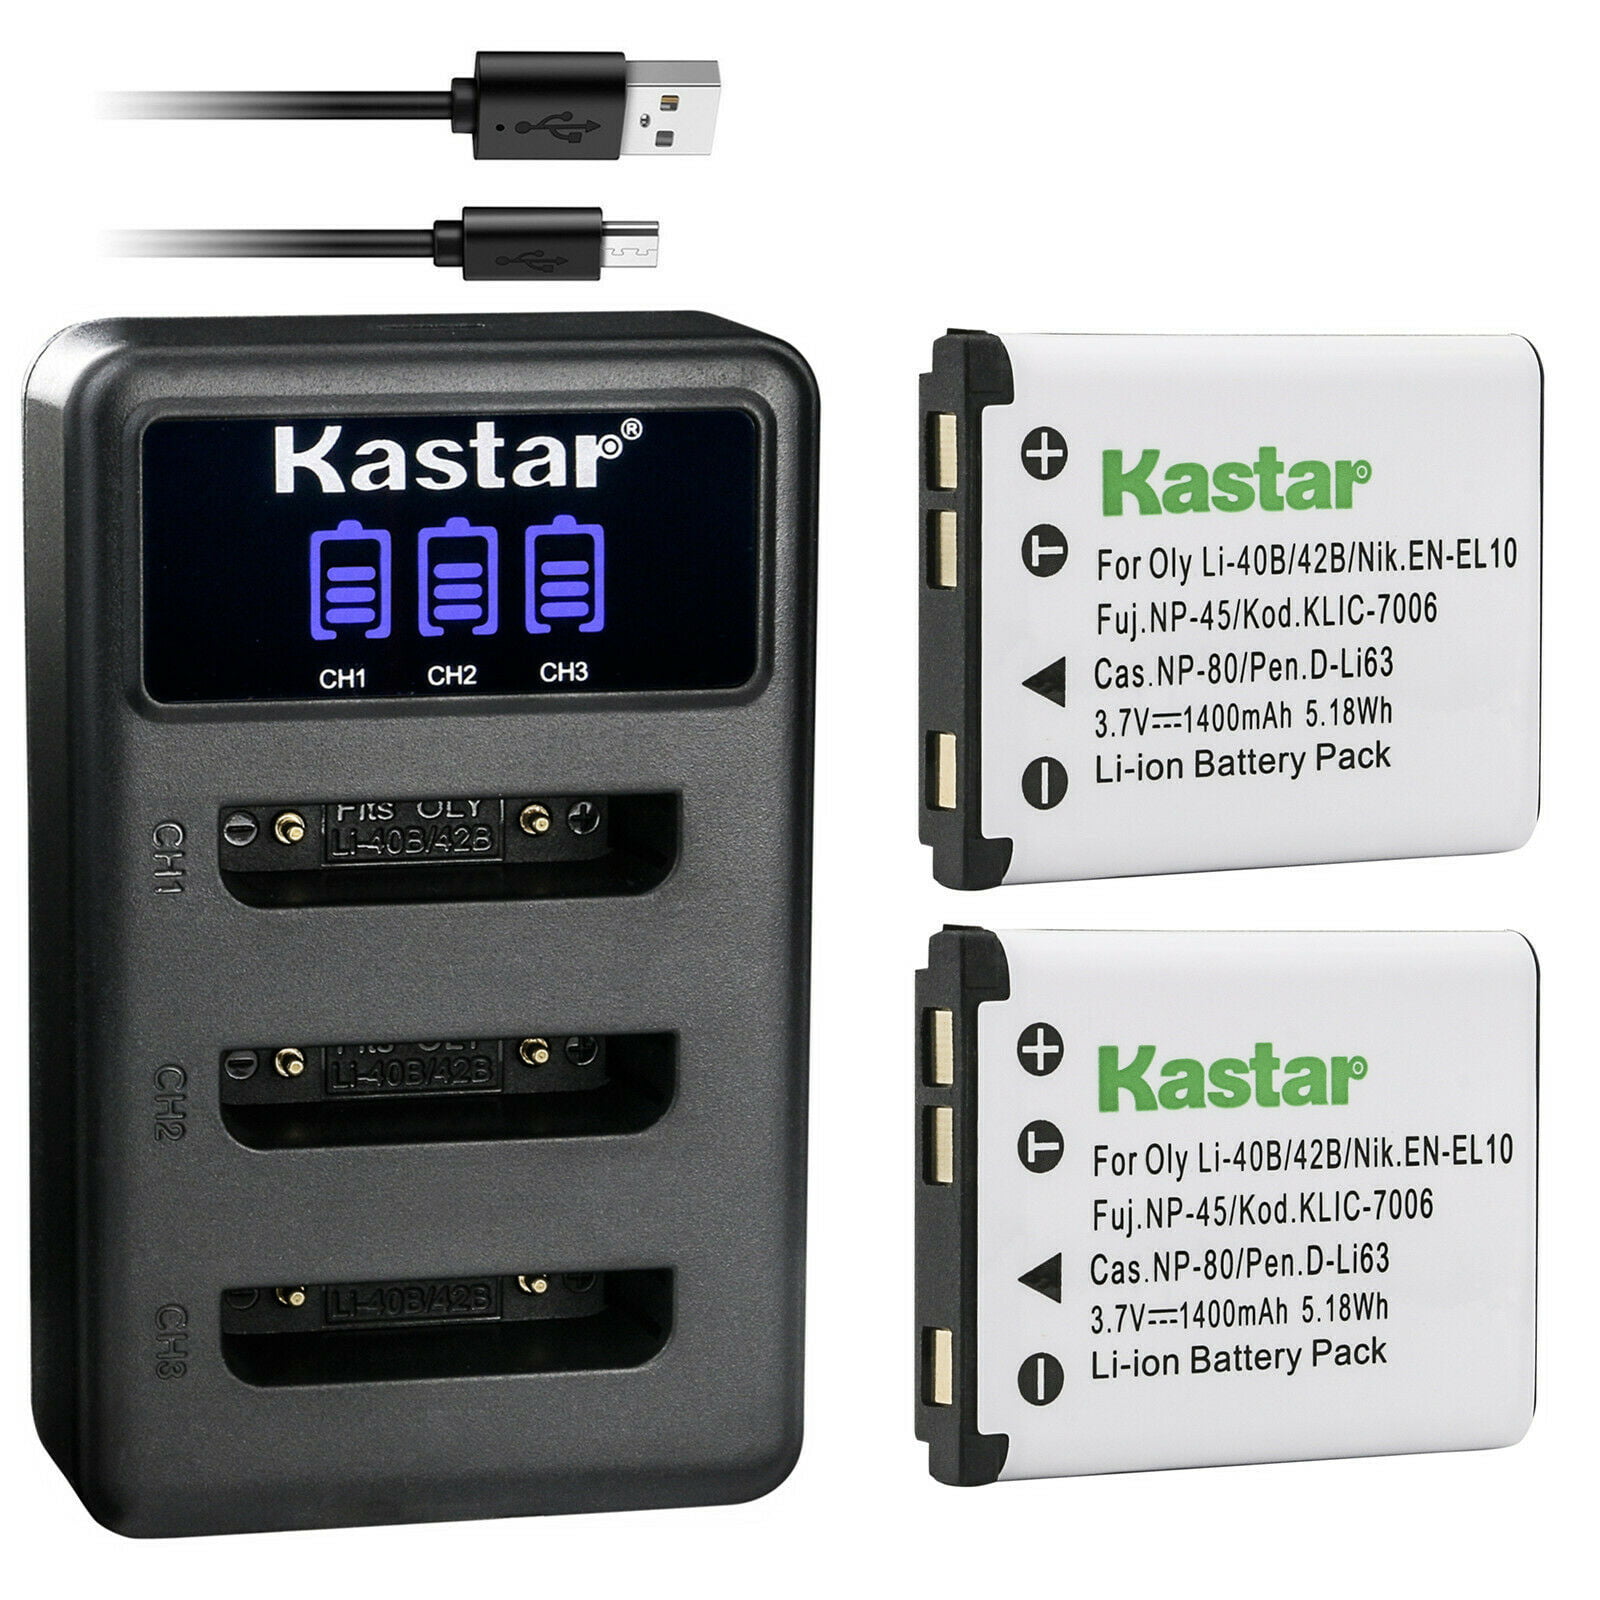 G5WP J1250 J1455 Q1455 E1055W E1486TW E1410SW Kastar 2 Pack Battery and LCD Triple USB Charger Compatible with GE E1045W E1255W G3WP E1276W E1450W E1680W J1050 E1480W J1456W 